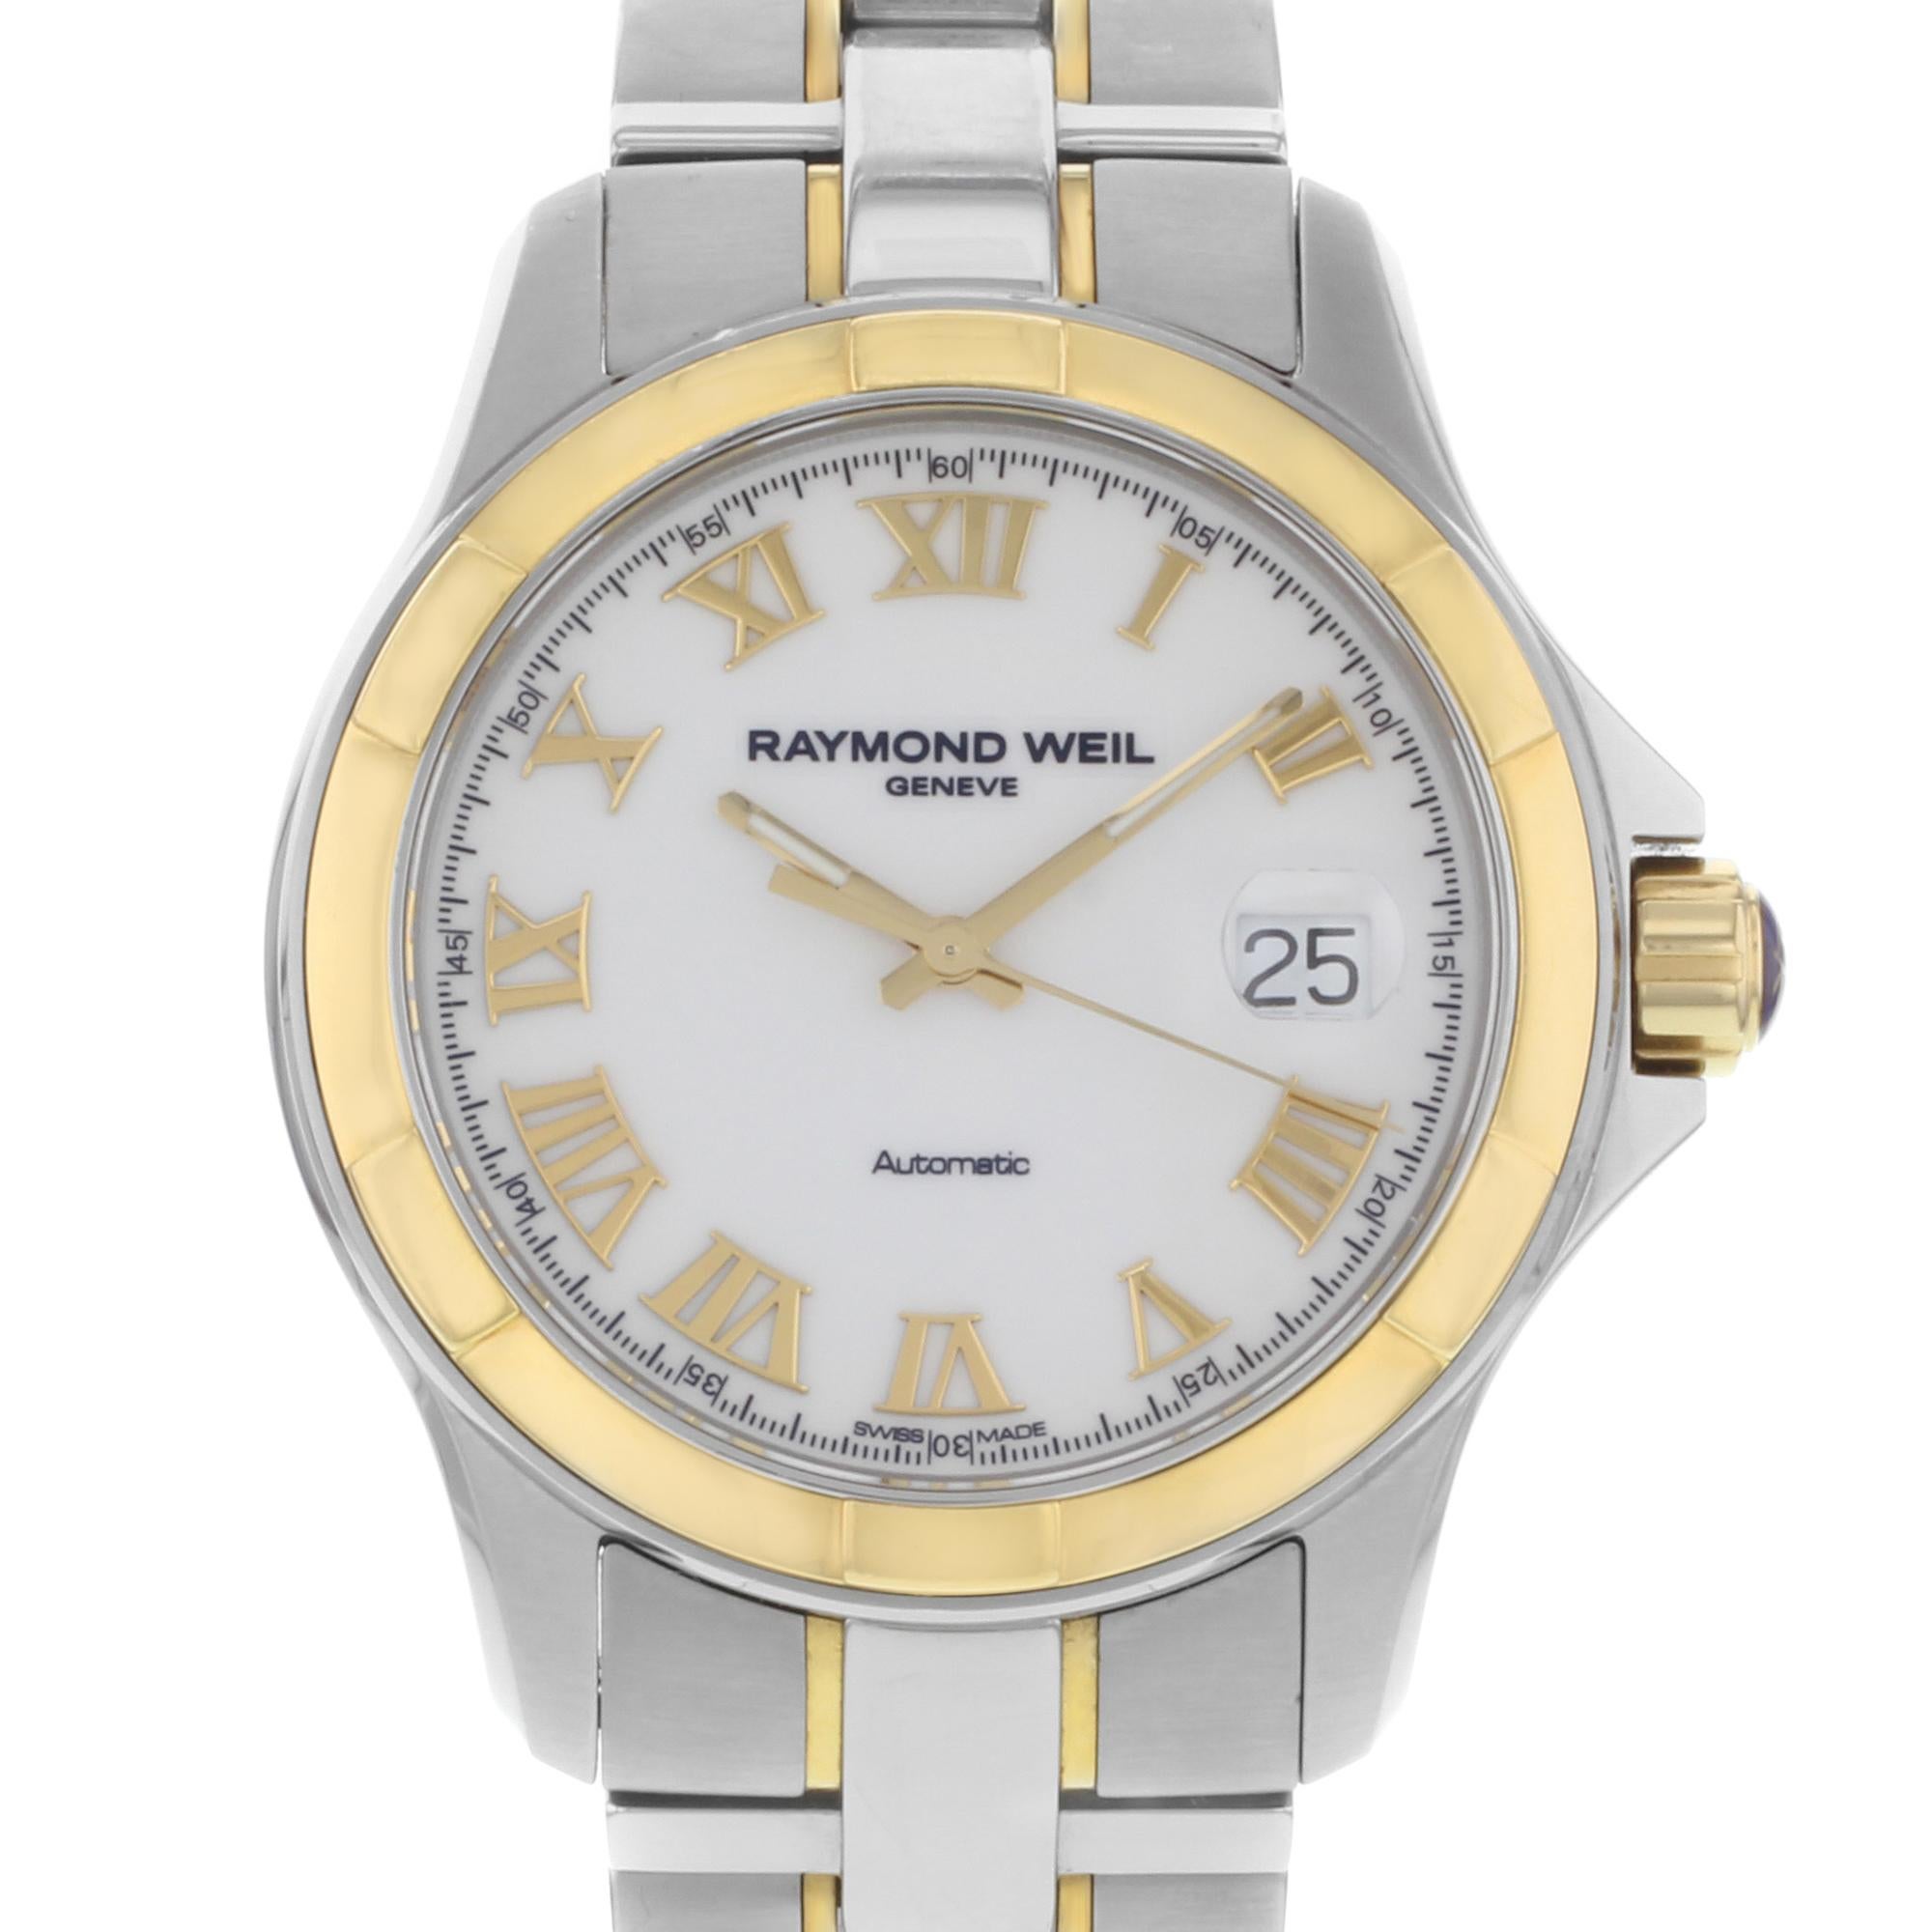 Pre-owned Raymond Weil Parsifal 18k Gold PVD Steel White Dial Men's Watch 2970-SG-00308. The Watch Bezel Shows Minor Dents and  Scratches. Original Box and Papers are Included. Covered by 1-year Chronostore Warranty. 
Details:
MSRP 3150
Brand